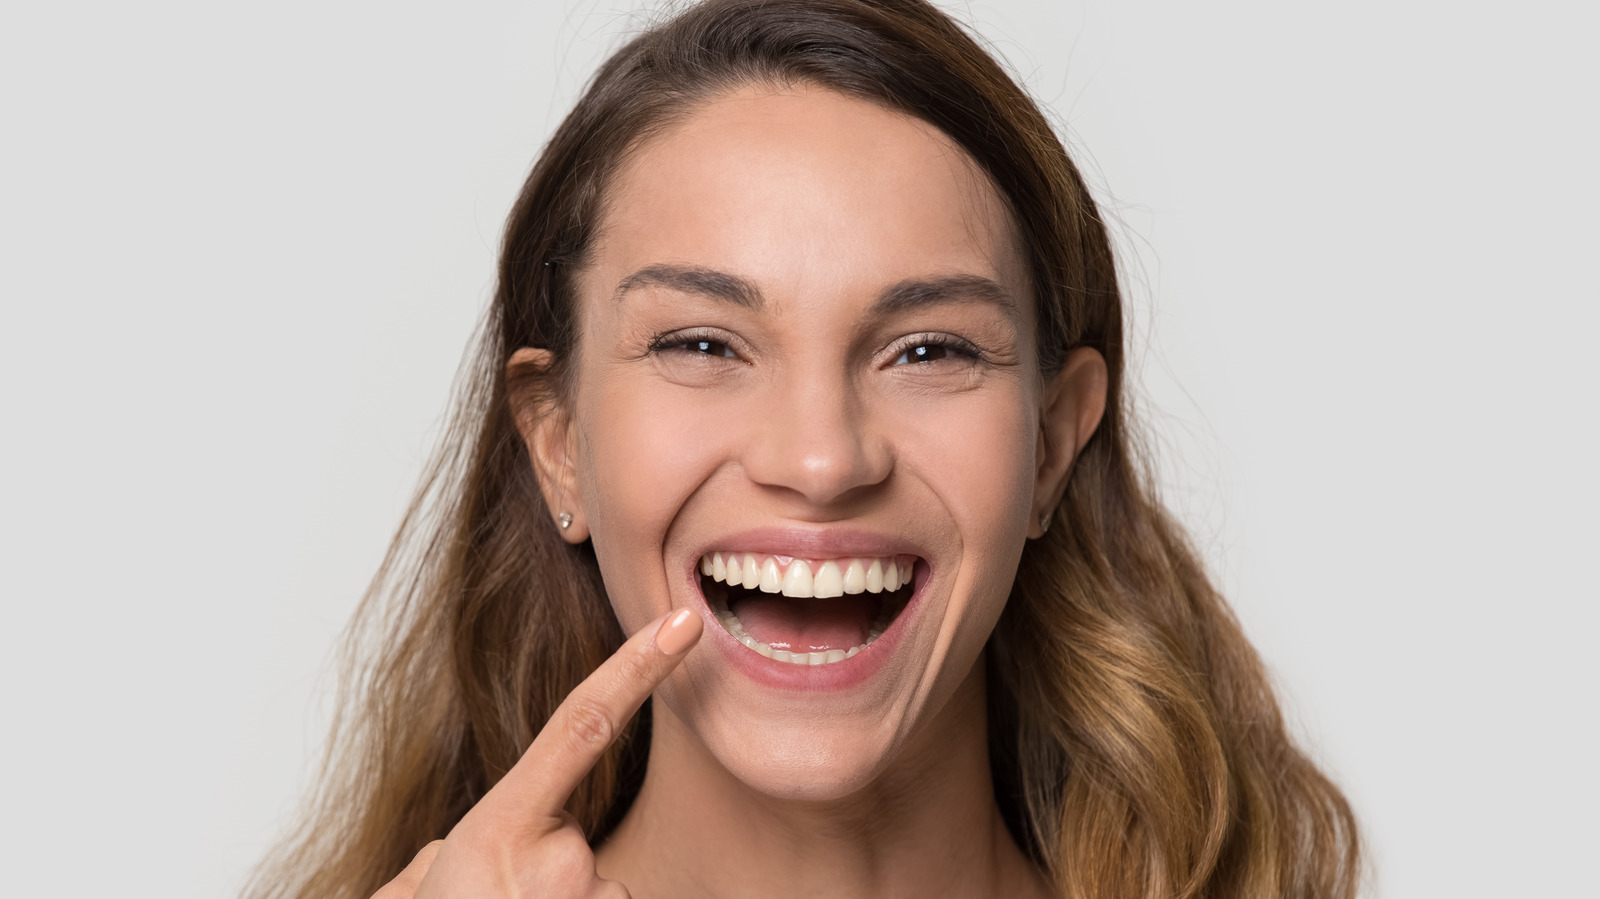 Are Braces Or Aligners More Hygienic For Your Mouth?